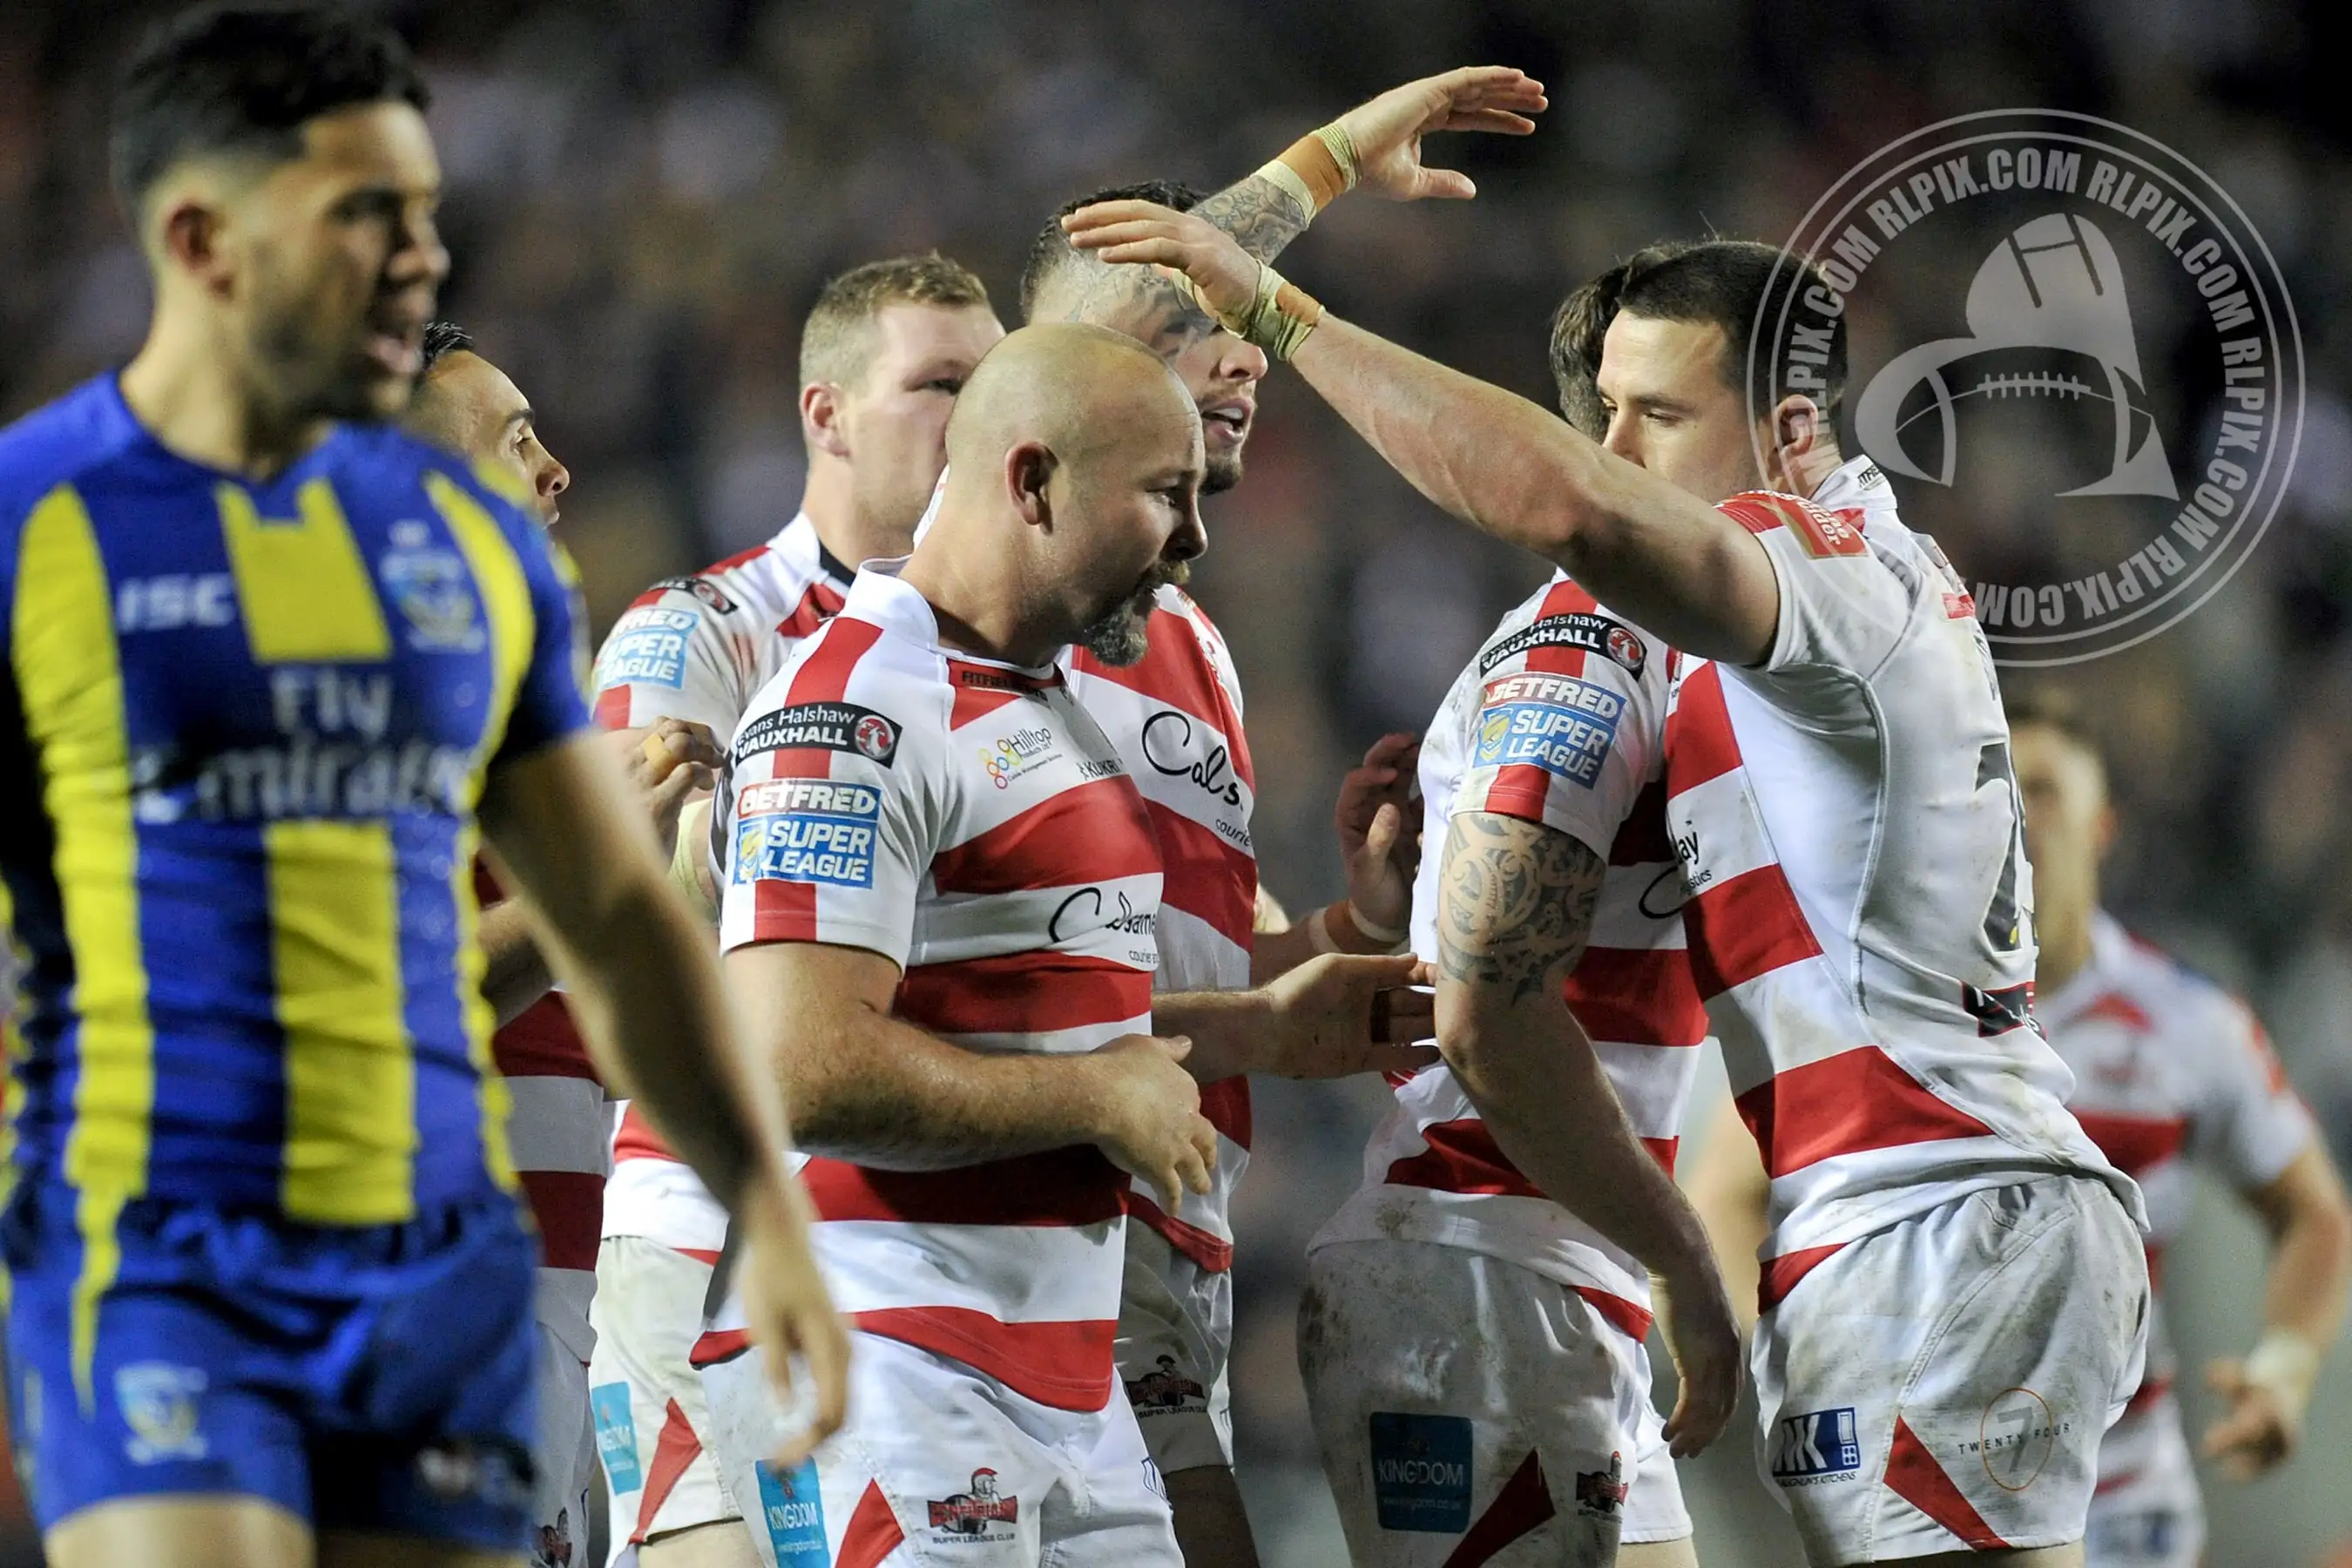 Centurions beat Warrington to secure back-to-back home wins